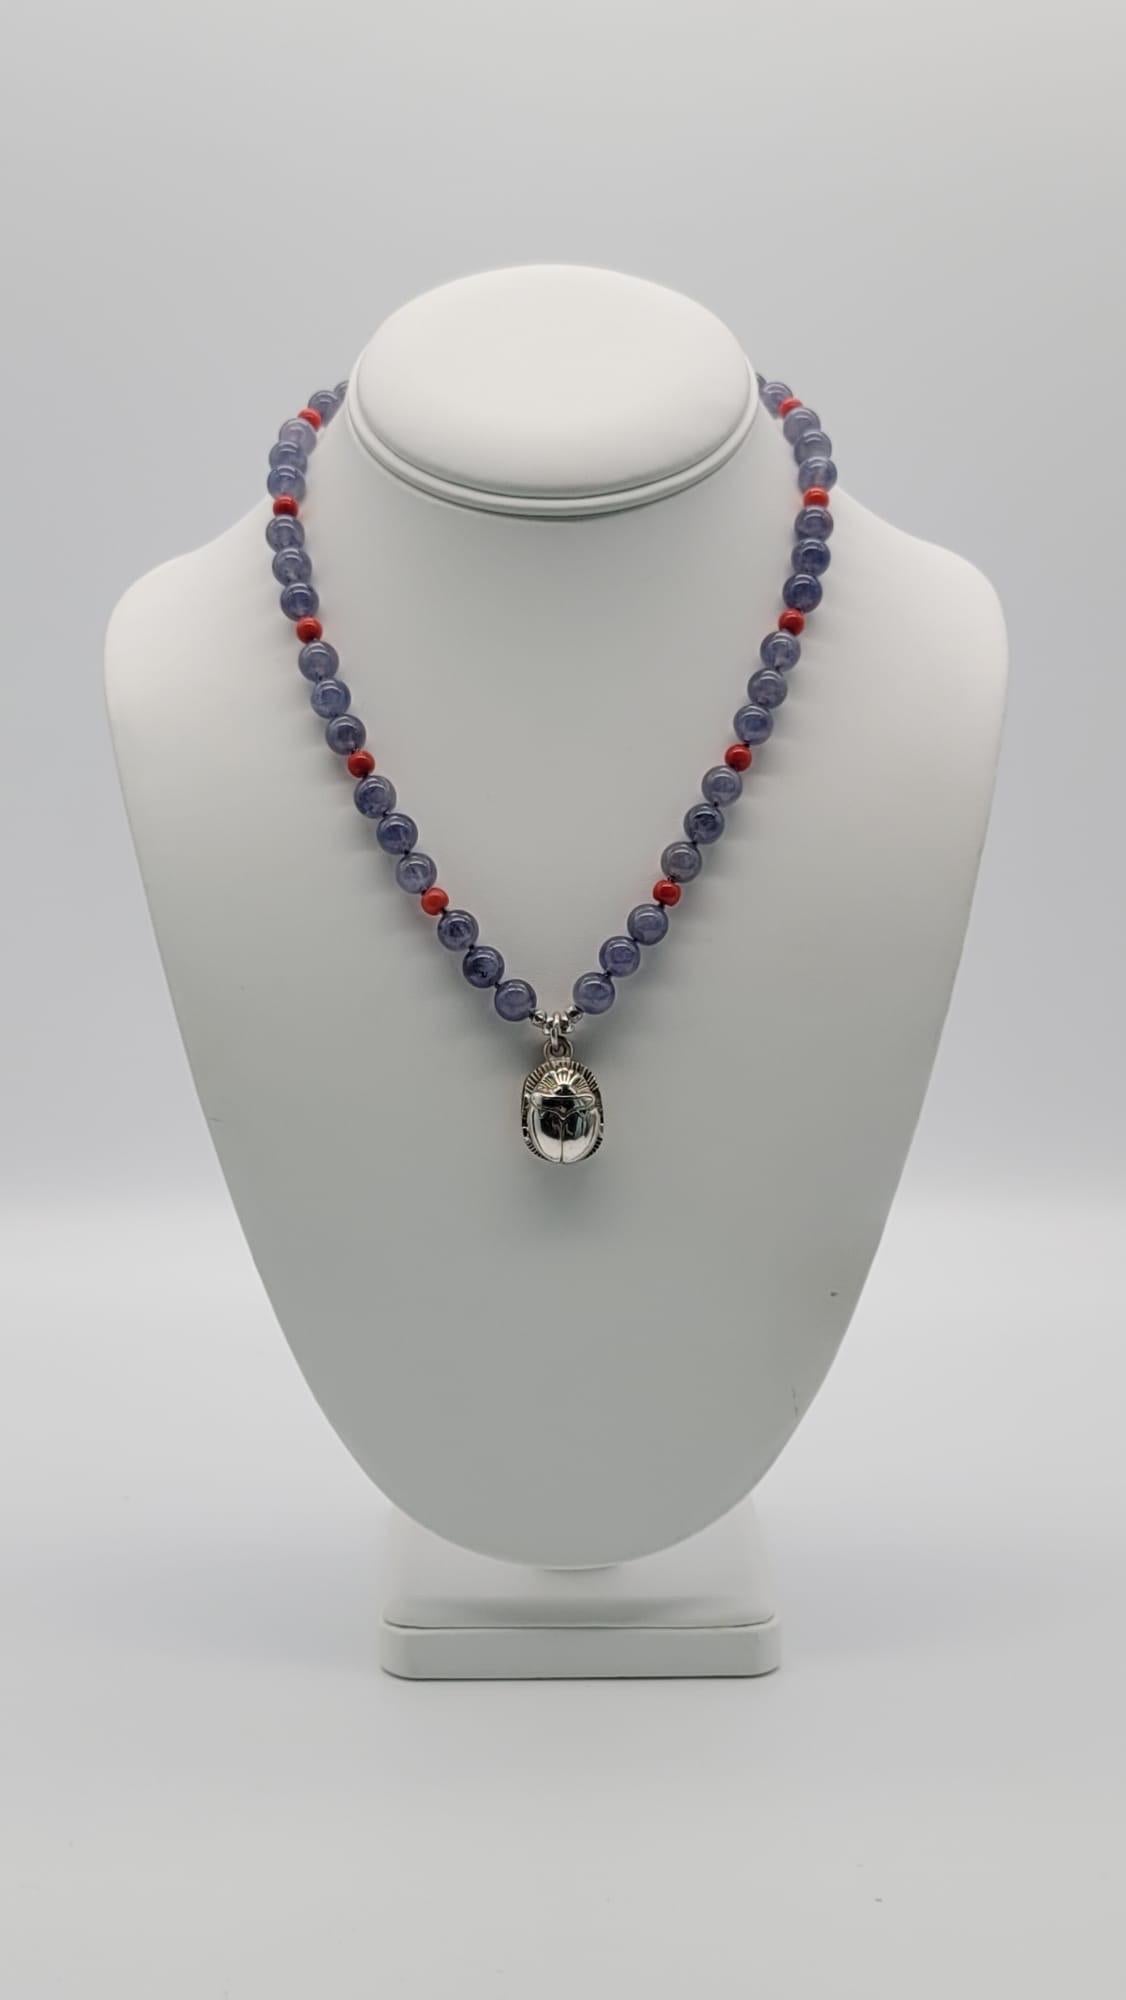 One-of-a-Kind

Enjoy the same protection as Cleopatra. Choose a sterling silver Scarab amulet suspended from an iolite and coral necklace. The sterling silver amulet, crafted in Egypt, is of the traditional design to remind the wearer of the cycle